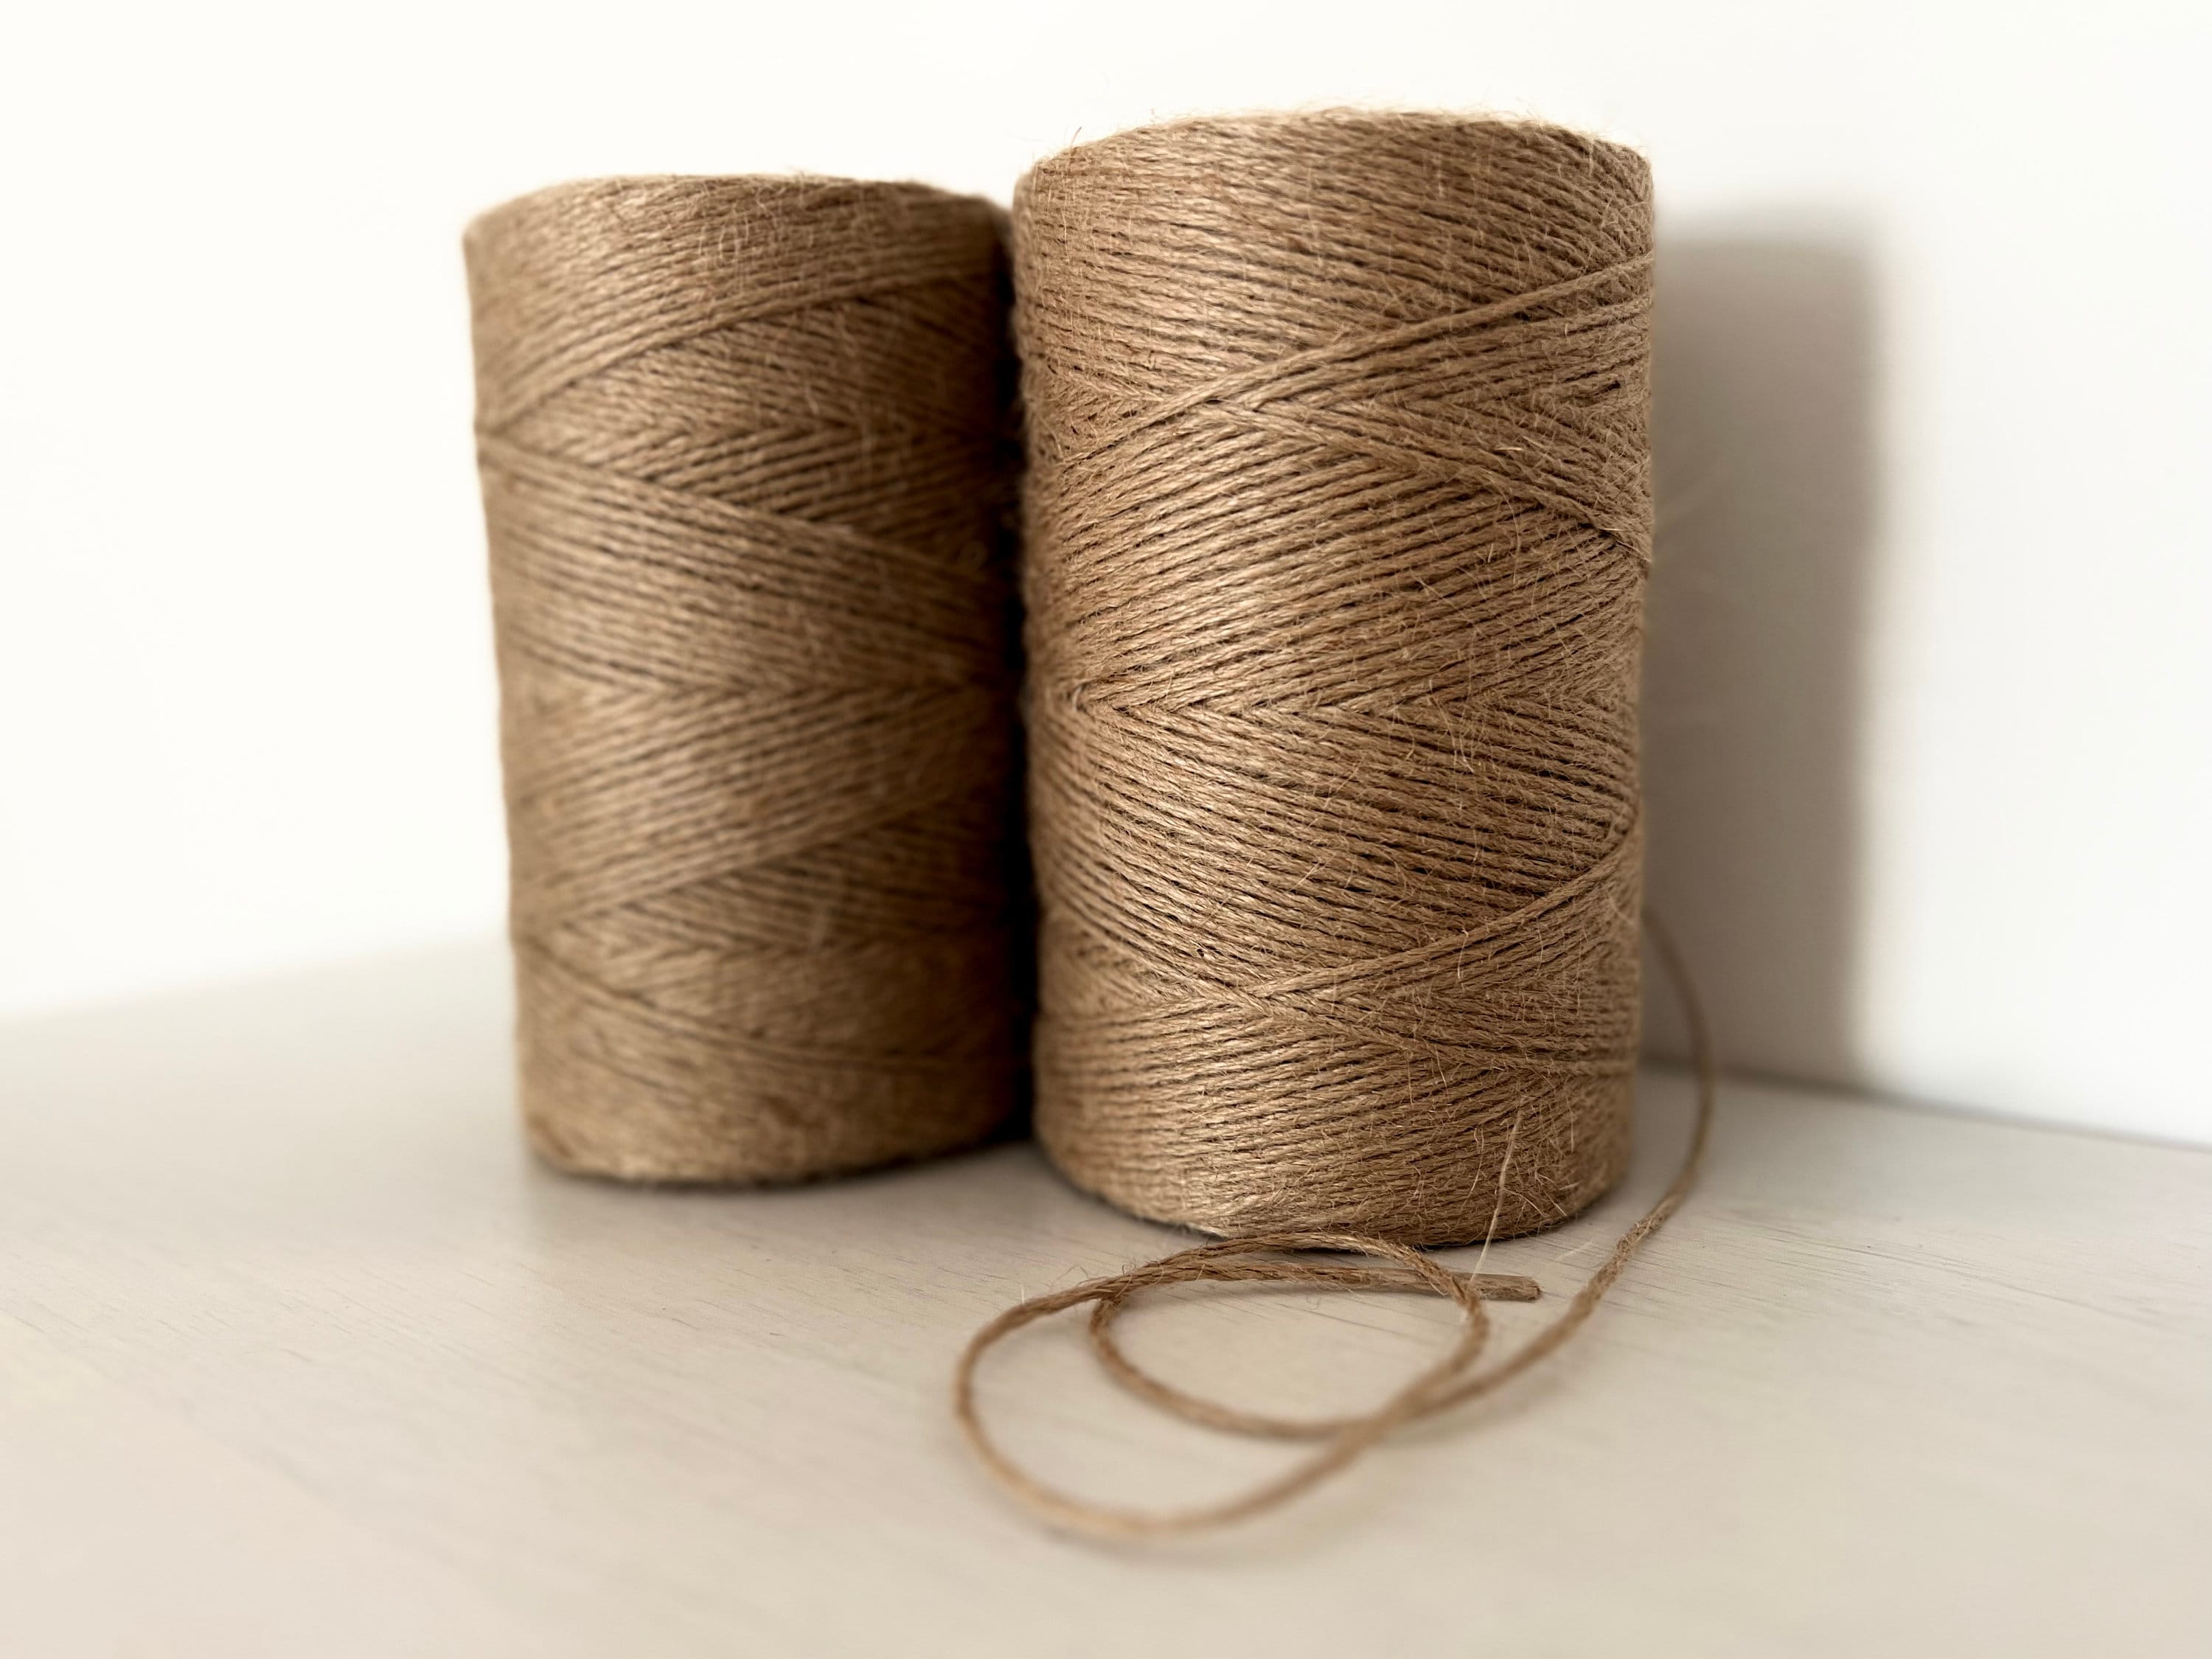  Jute Twine - 1 Ply Brown Roll 285' Jute Twine for Crafts - Soft  Yet Strong Natural Jute String, Burlap String Packaging, Wrapping, Packing  Materials, Decorative Rope Cord for Hanging Craft